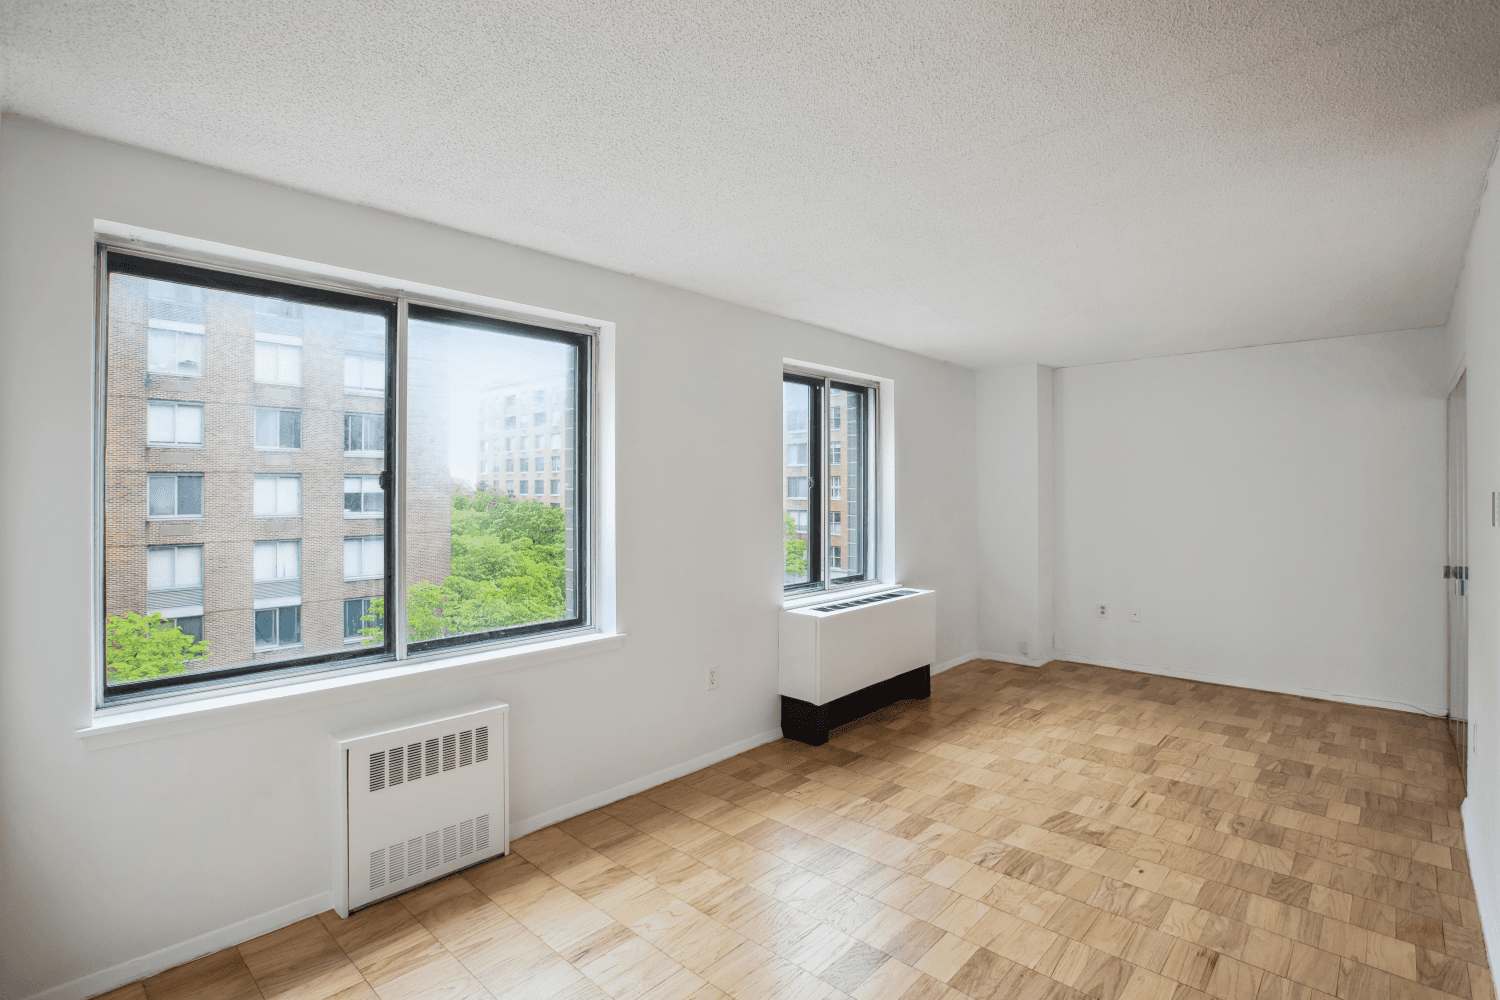 Sun filled south facing alcove studio with partial river views at the Soundings, a premier full service condo building in Battery Park City situated just one block from the Hudson ...